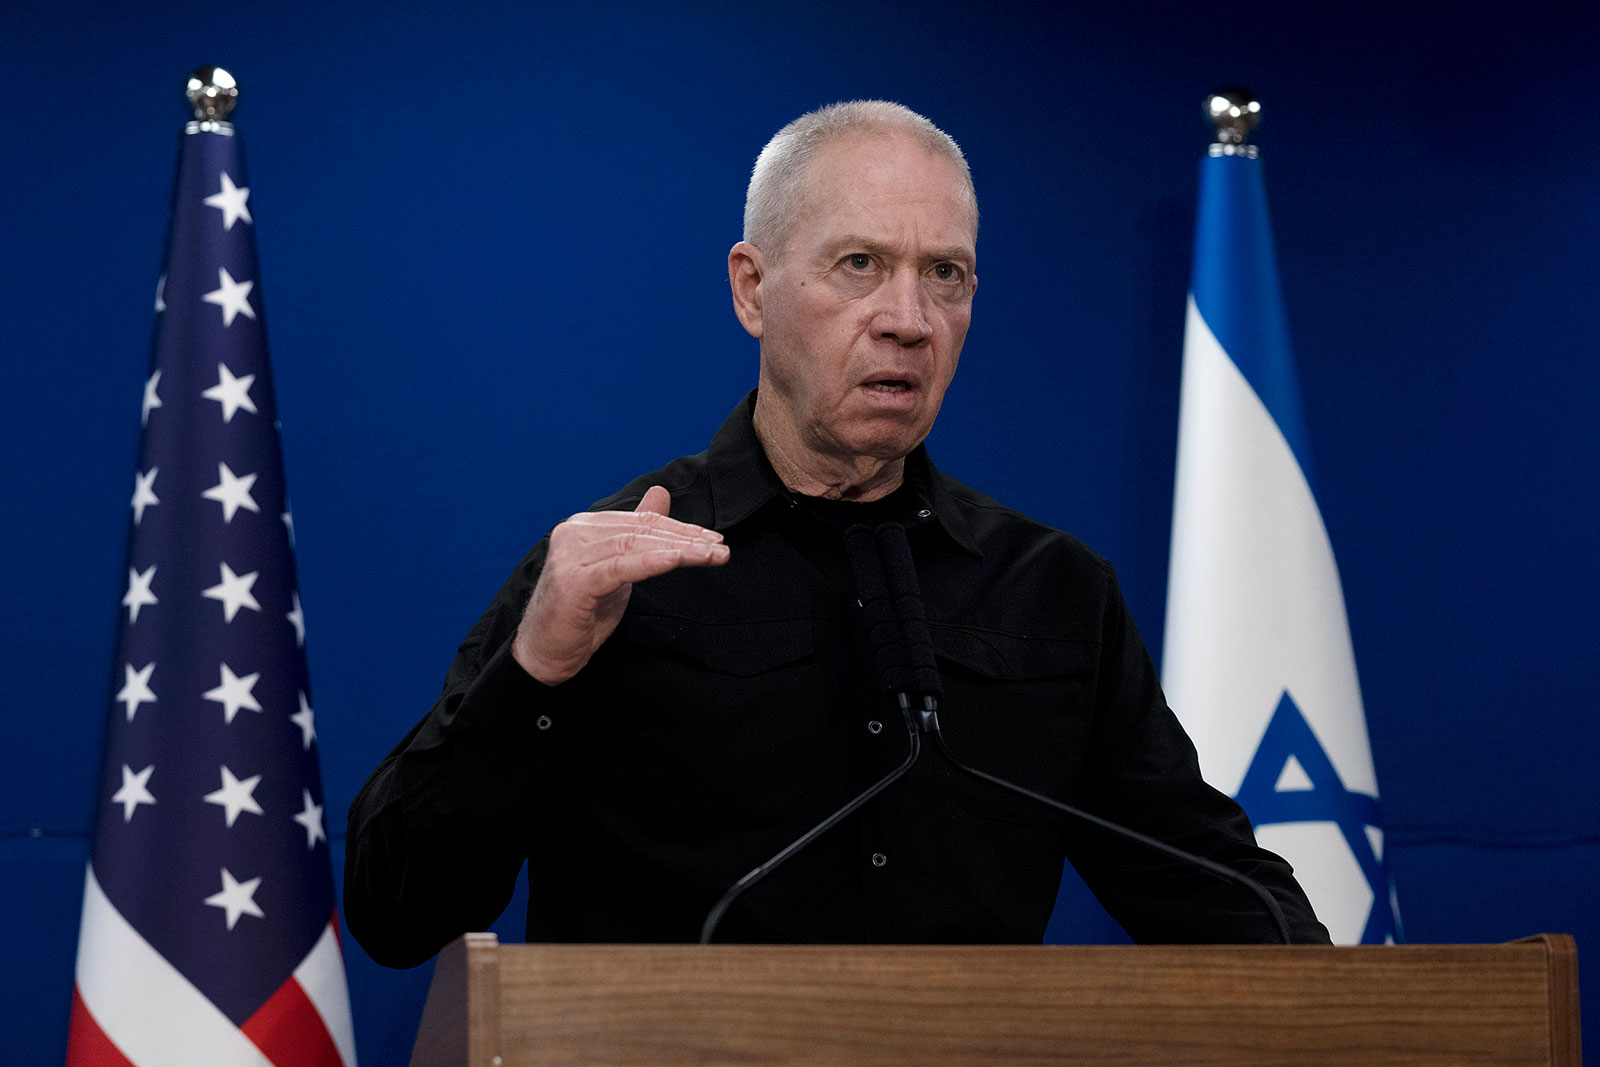 srael Minister of Defense Yoav Gallant speaks during a press conference in Tel Aviv, Israel, on Monday, December 18